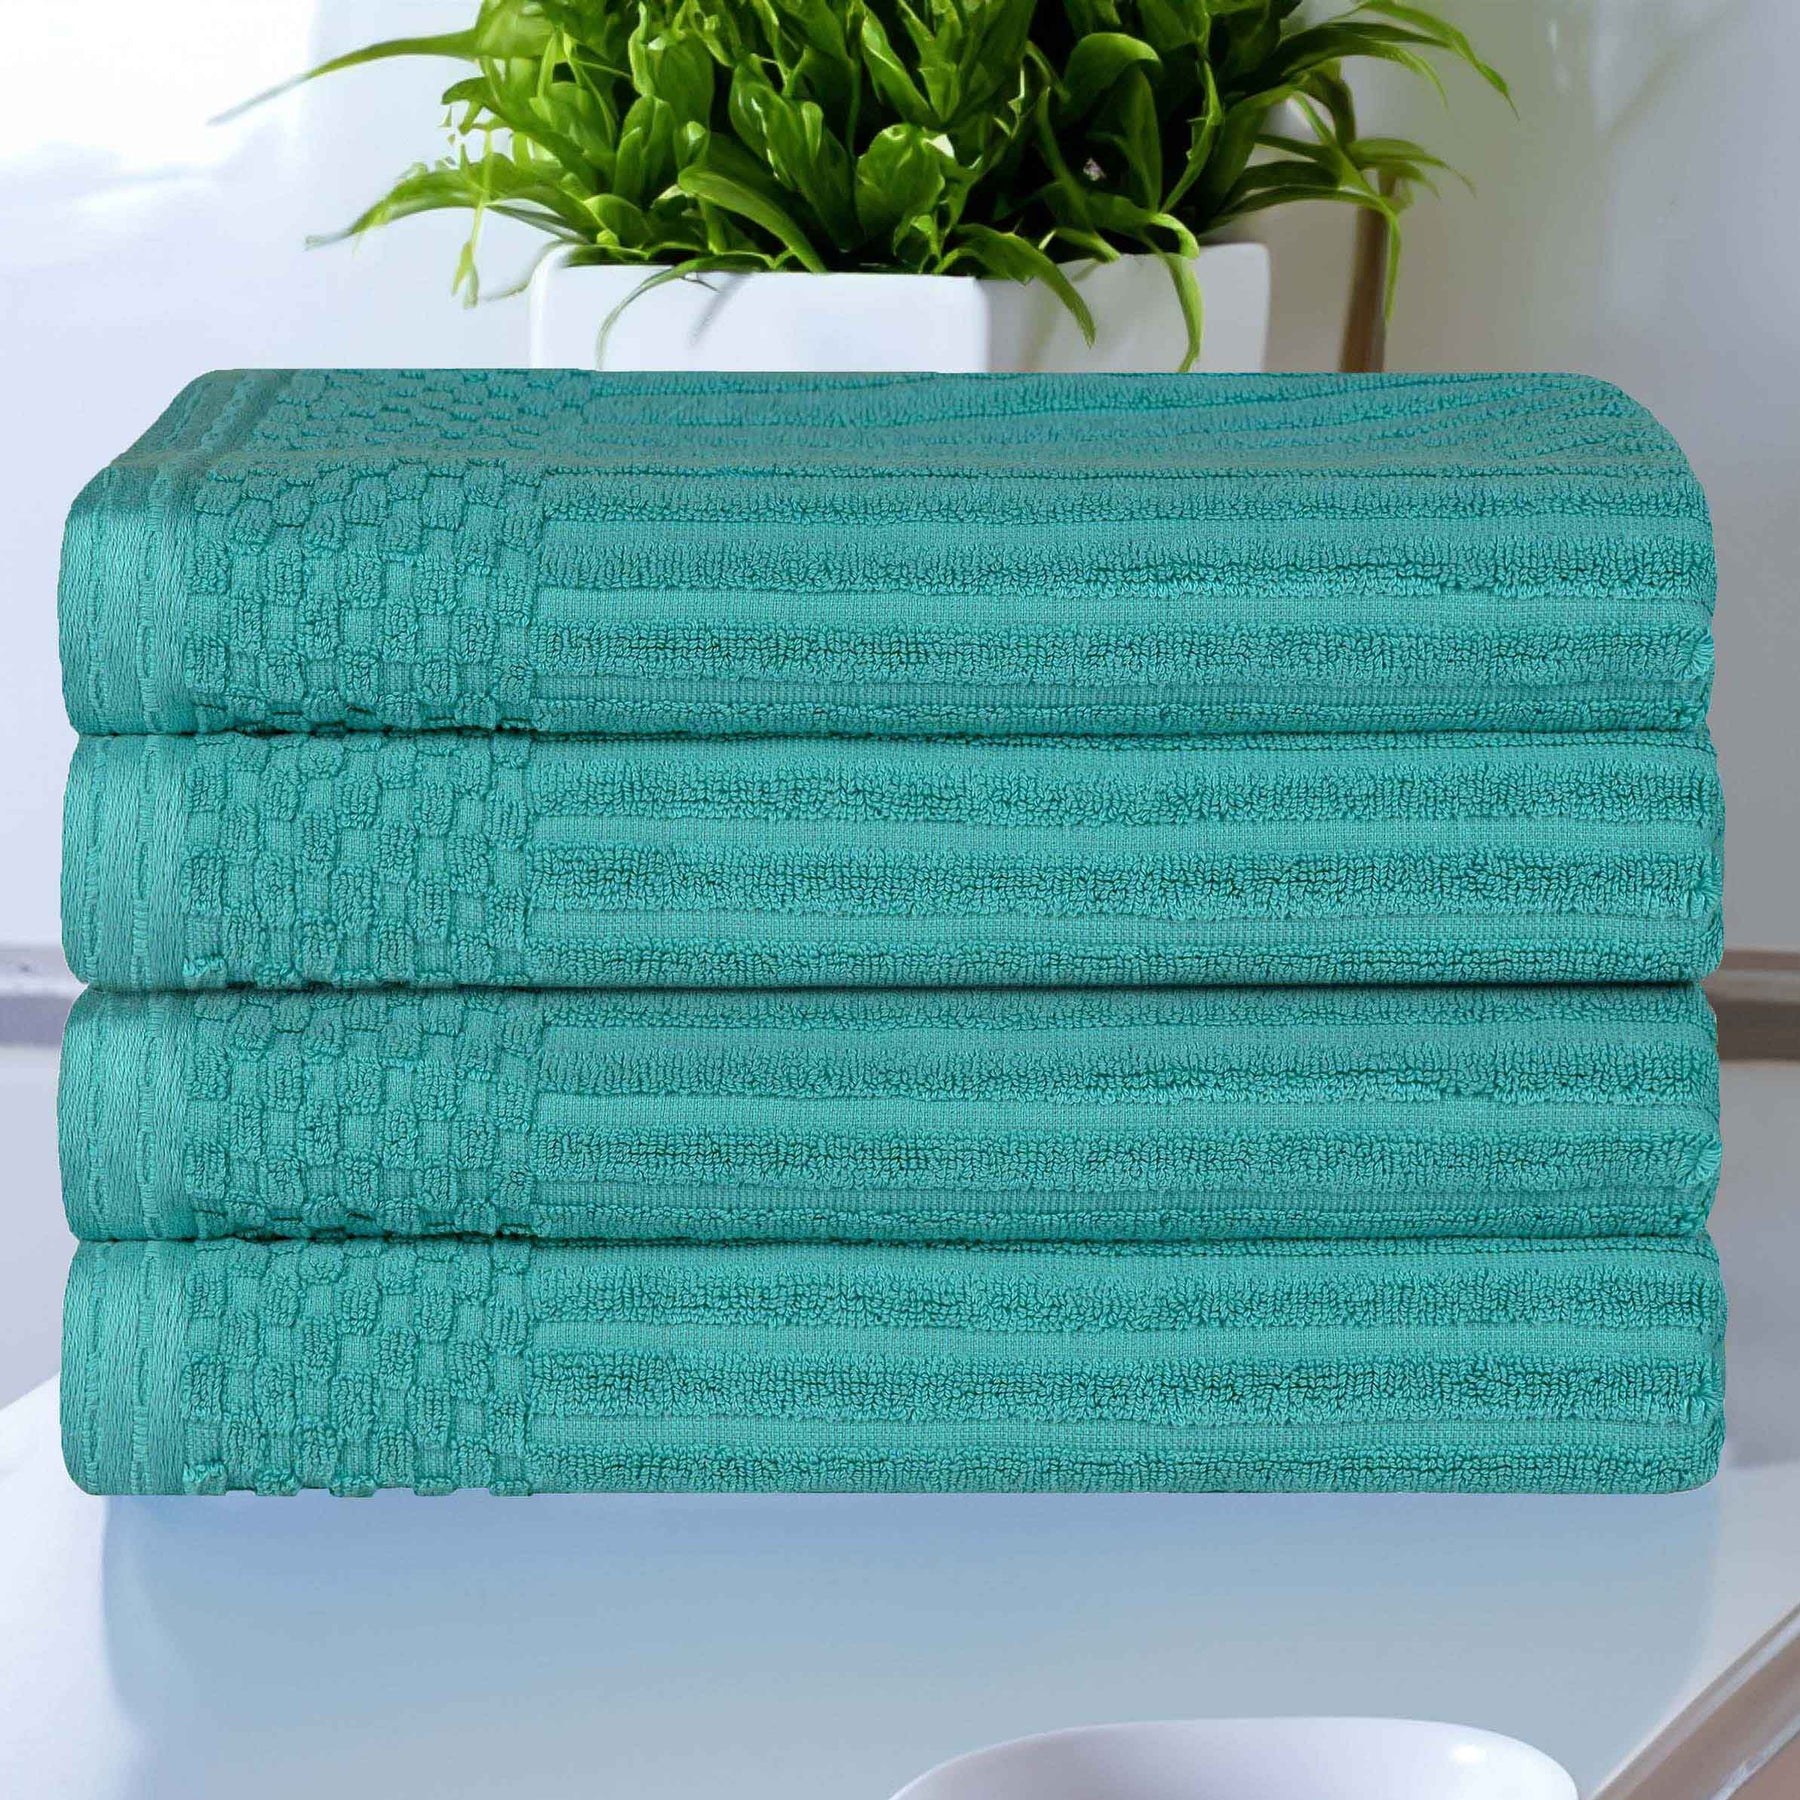 Soho Ribbed Cotton Absorbent Bath Towel Set of 4 - Turquoise